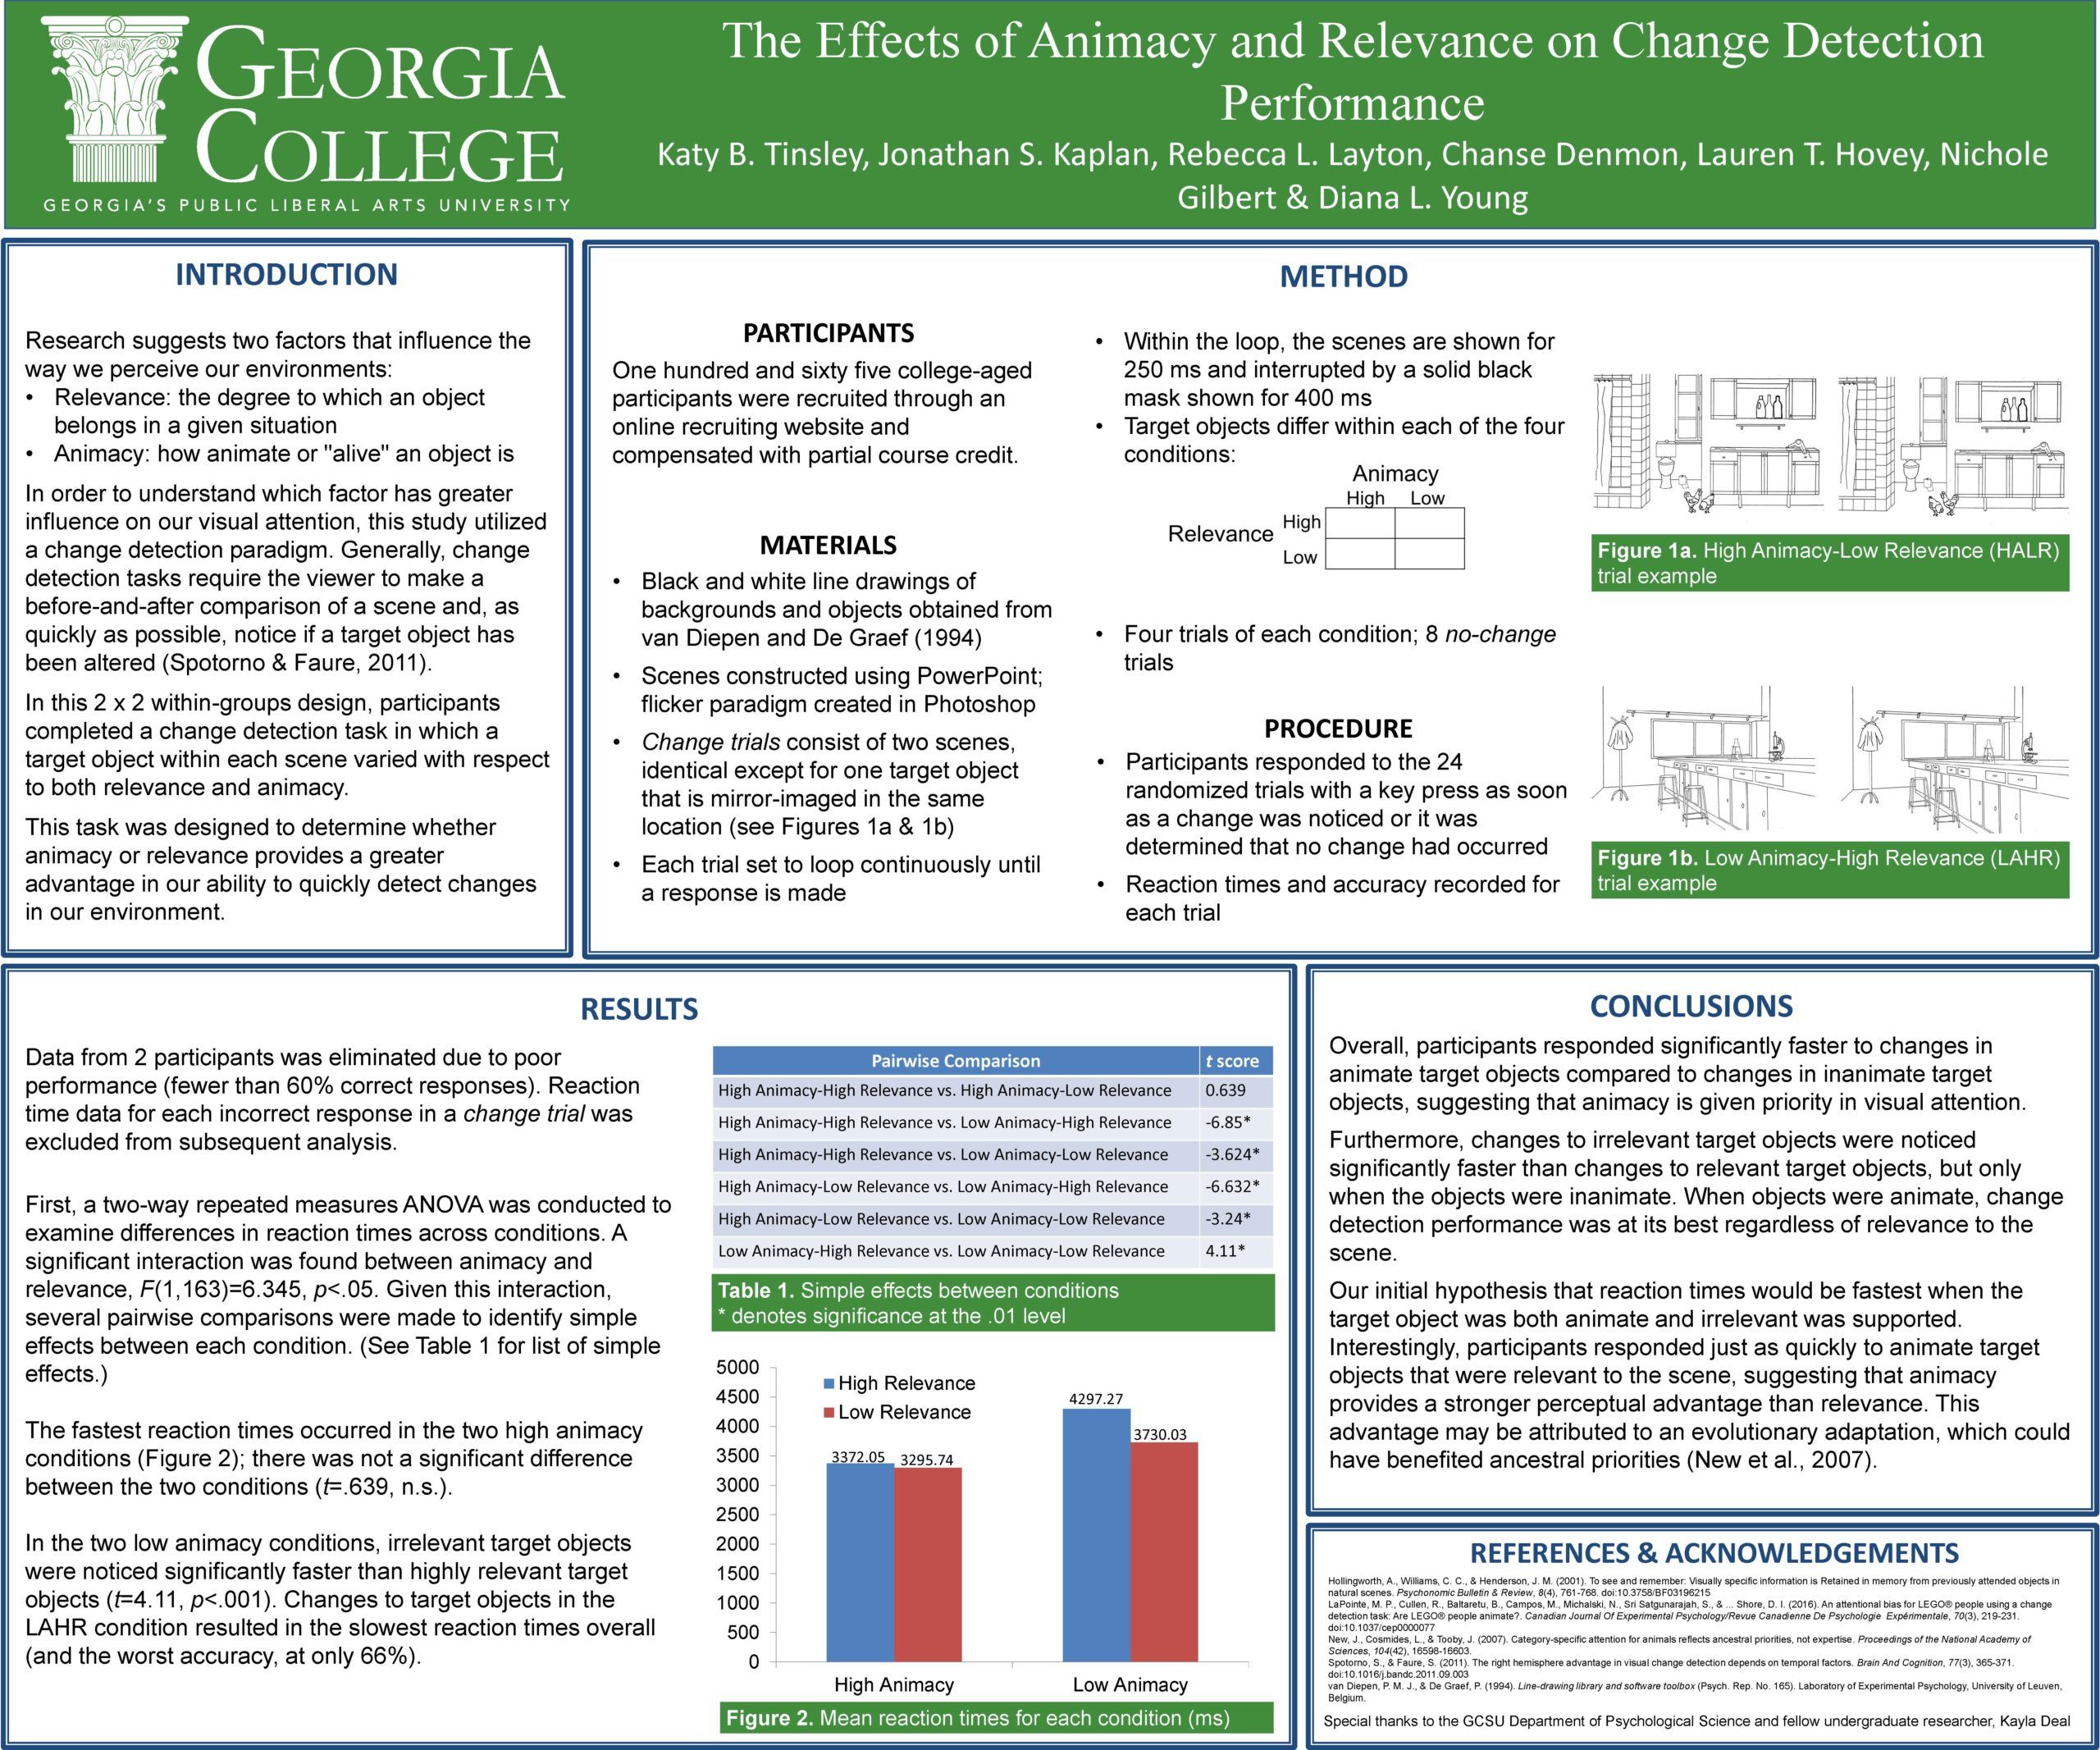 Poster_The Effects of Animacy and Relevance on Change Detection Performance (2018)